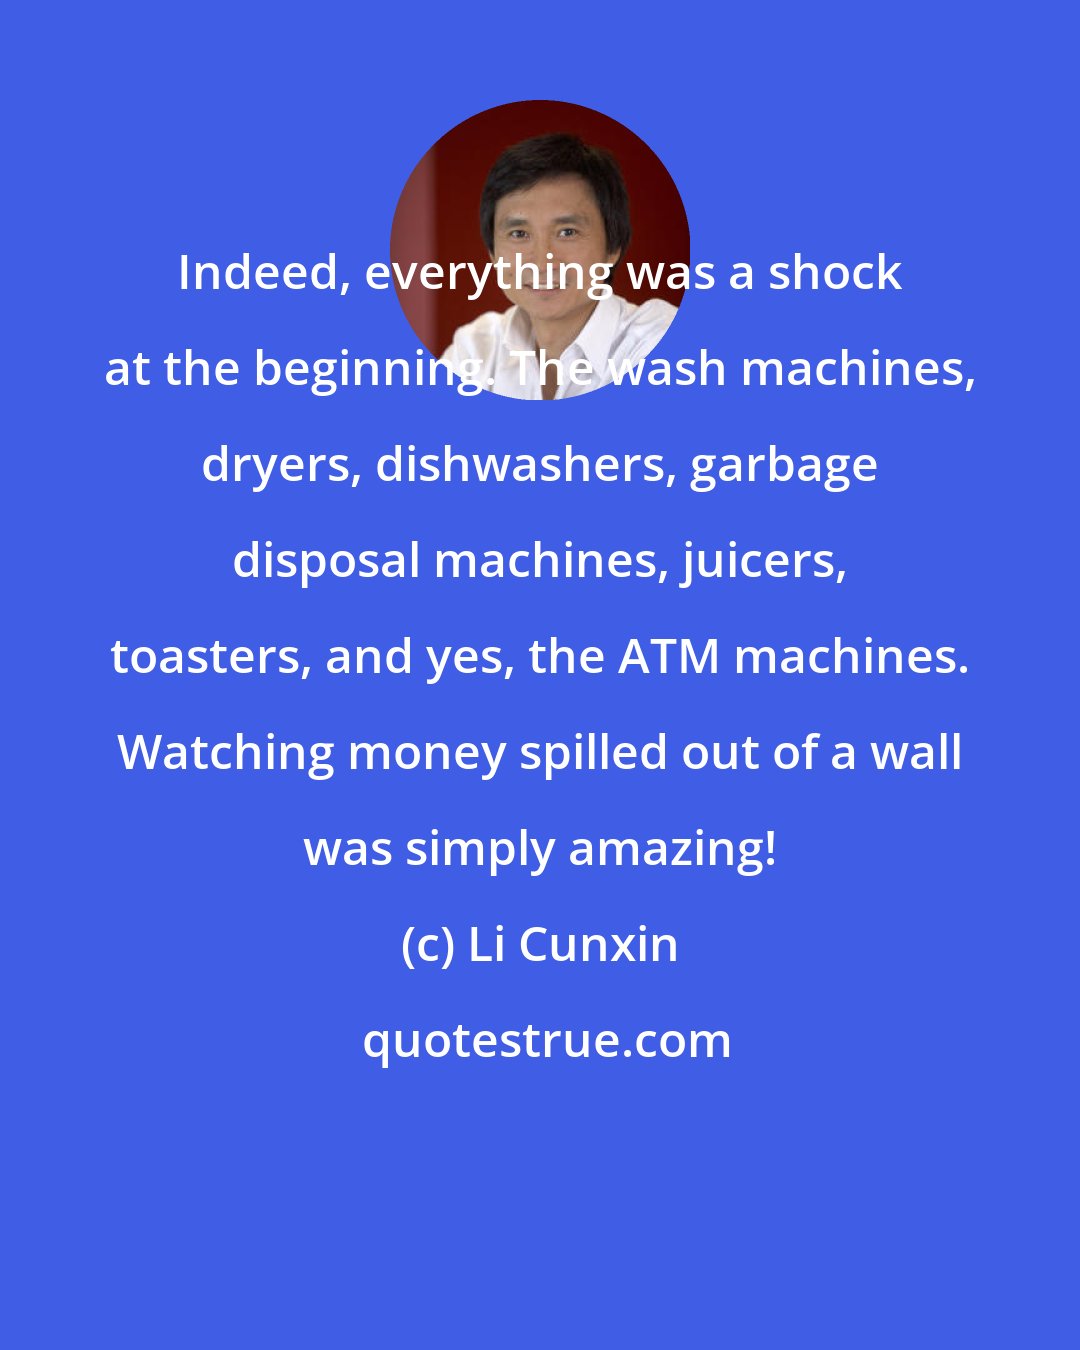 Li Cunxin: Indeed, everything was a shock at the beginning. The wash machines, dryers, dishwashers, garbage disposal machines, juicers, toasters, and yes, the ATM machines. Watching money spilled out of a wall was simply amazing!